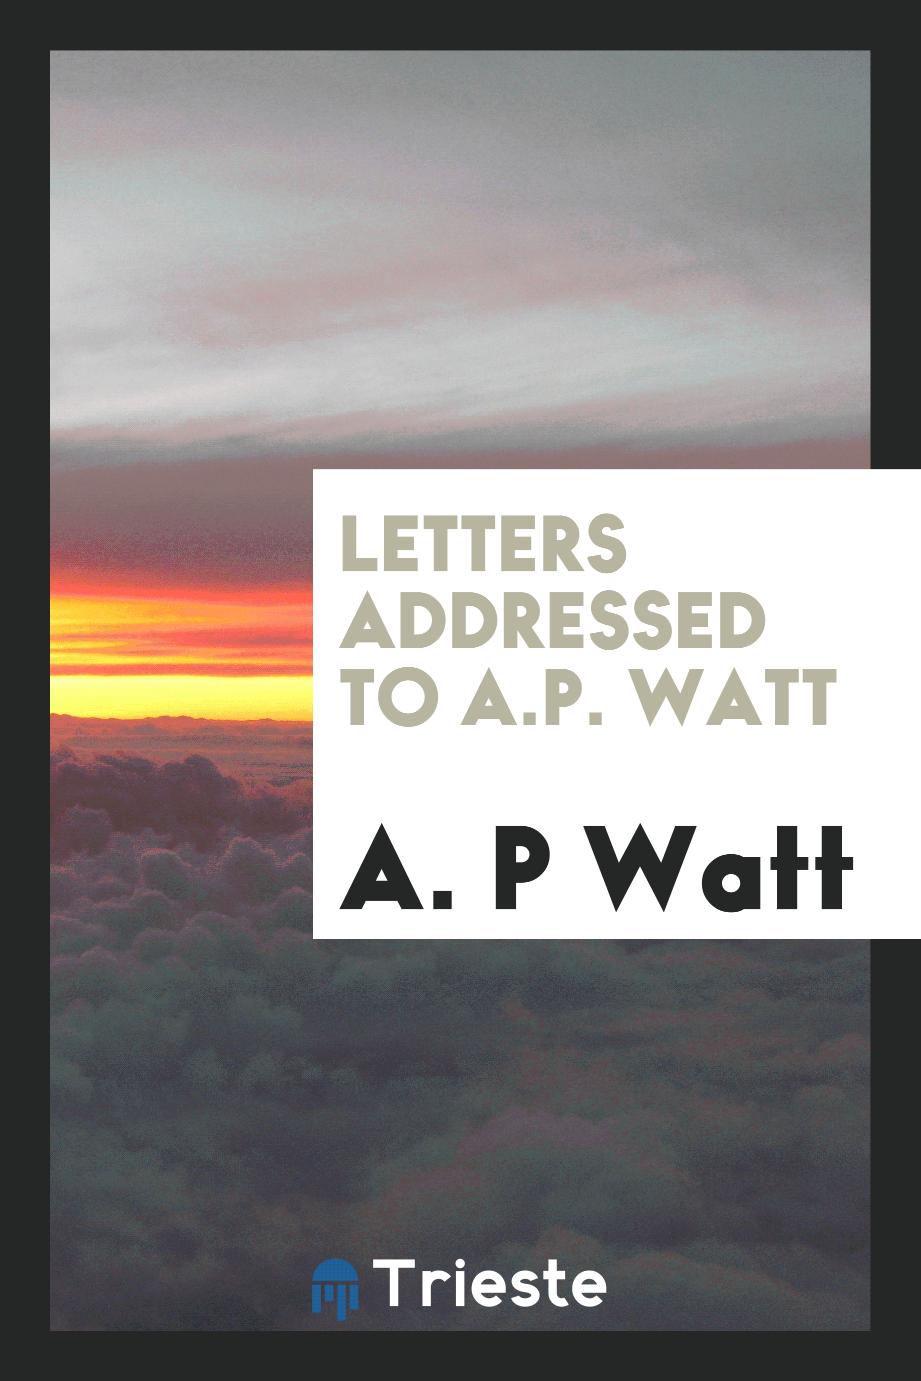 Letters addressed to A.P. Watt